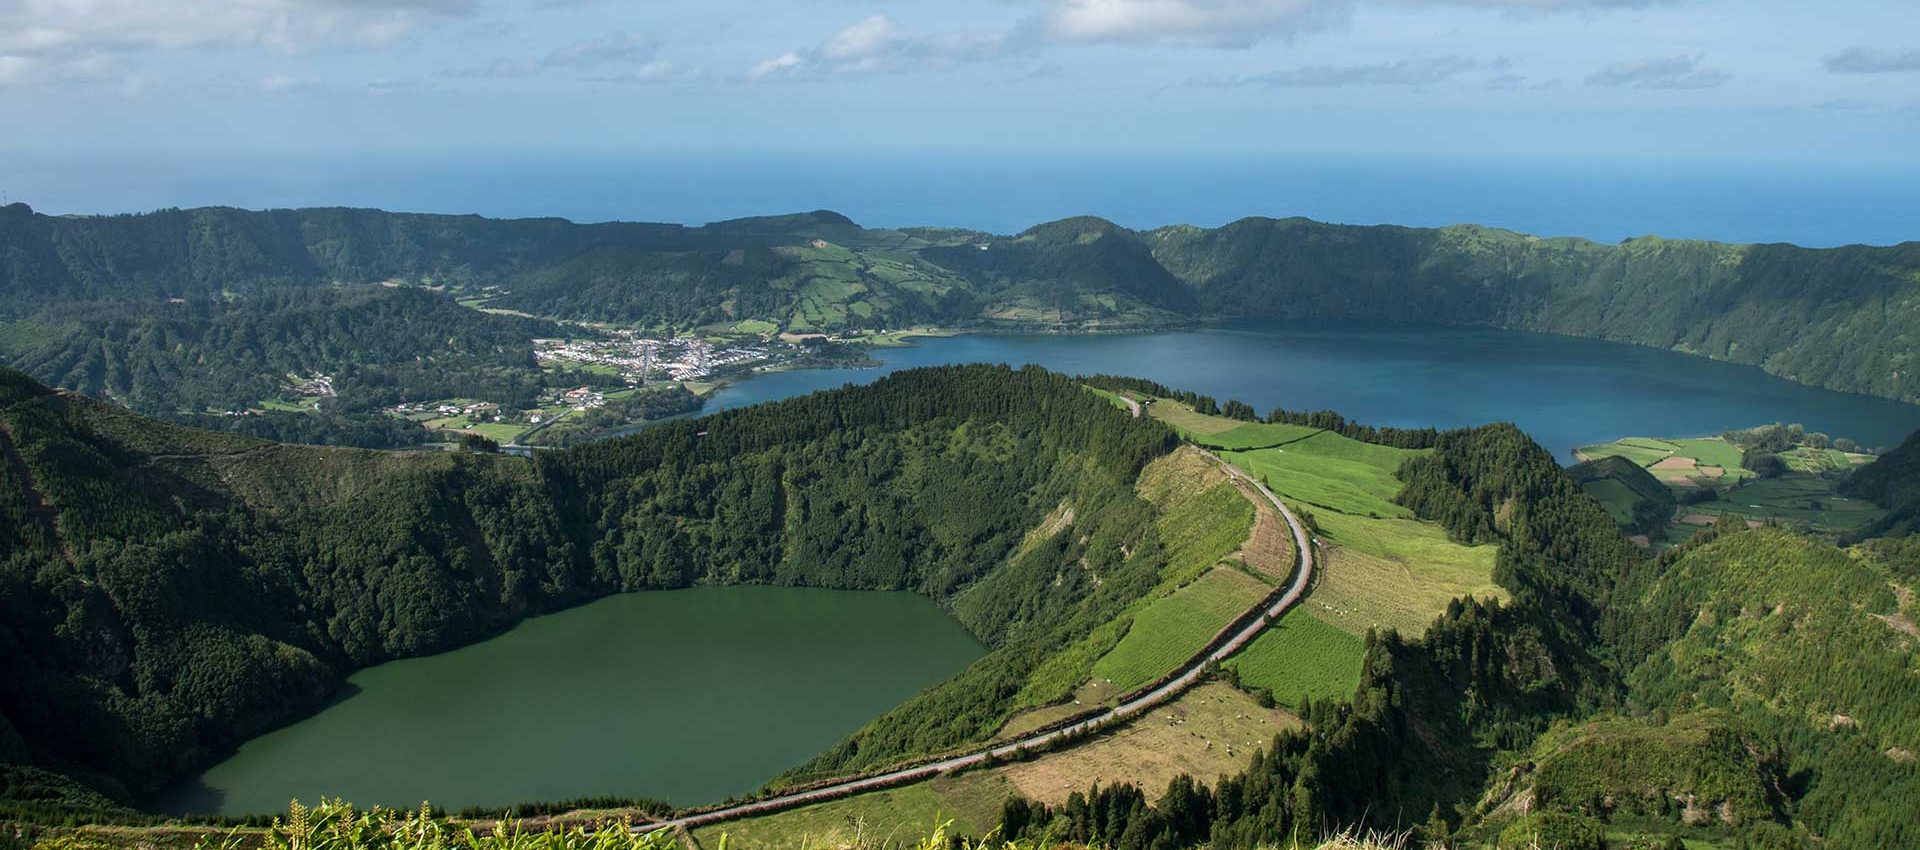 We will visit all the major sights of São Miguel, this view of Sete Cidades will be one of the best ones.